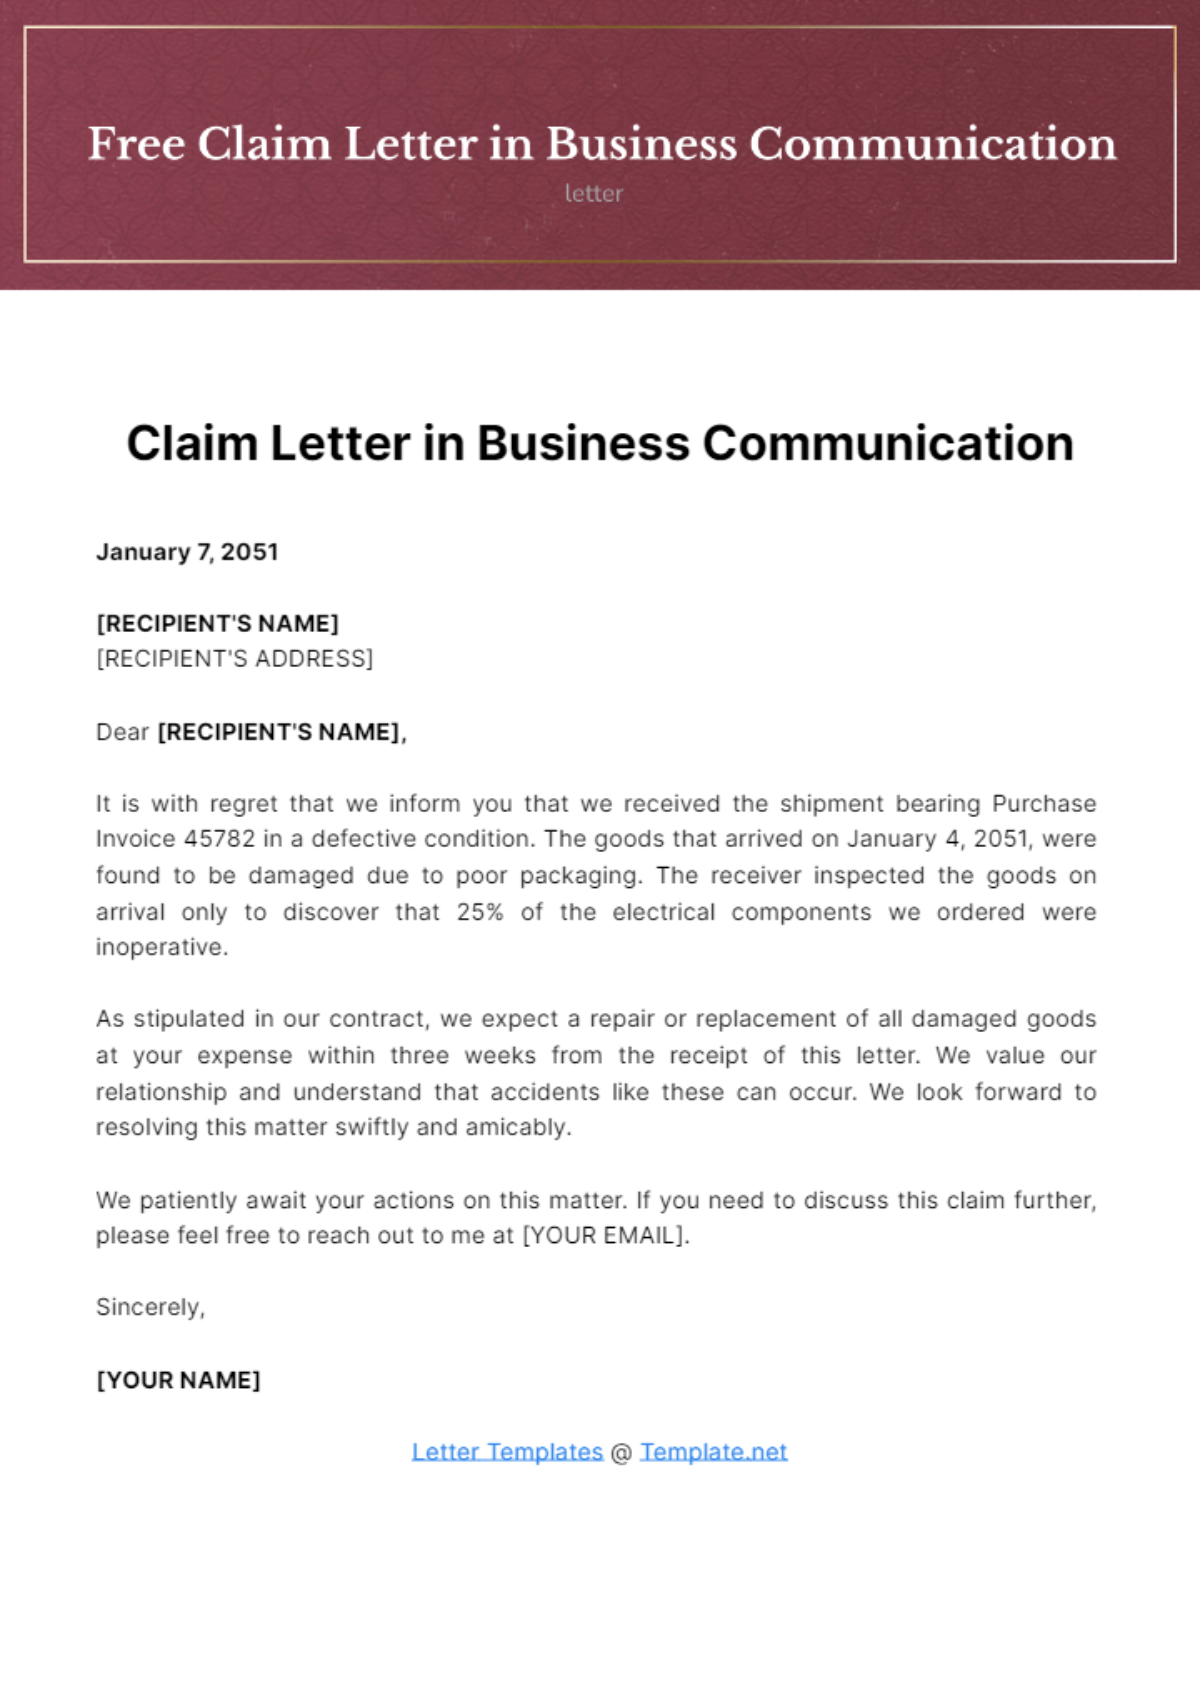 Free Claim Letter in Business Communication Template